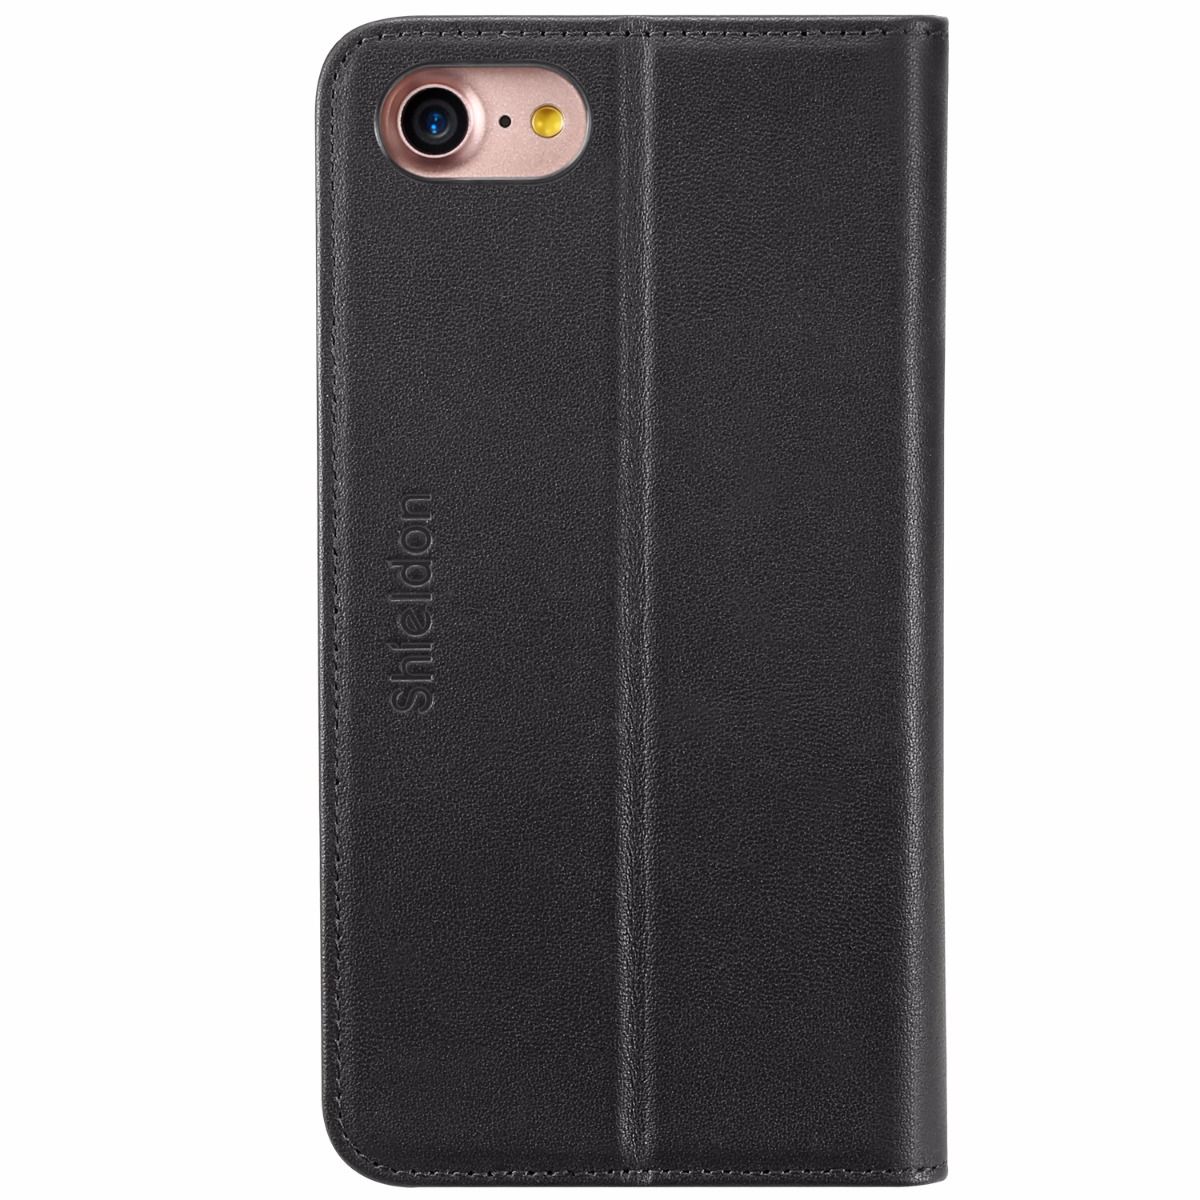 iPhone 8 Wallet Case with Genuine Cover, Closure, Flip Kickstand Function, Book Style